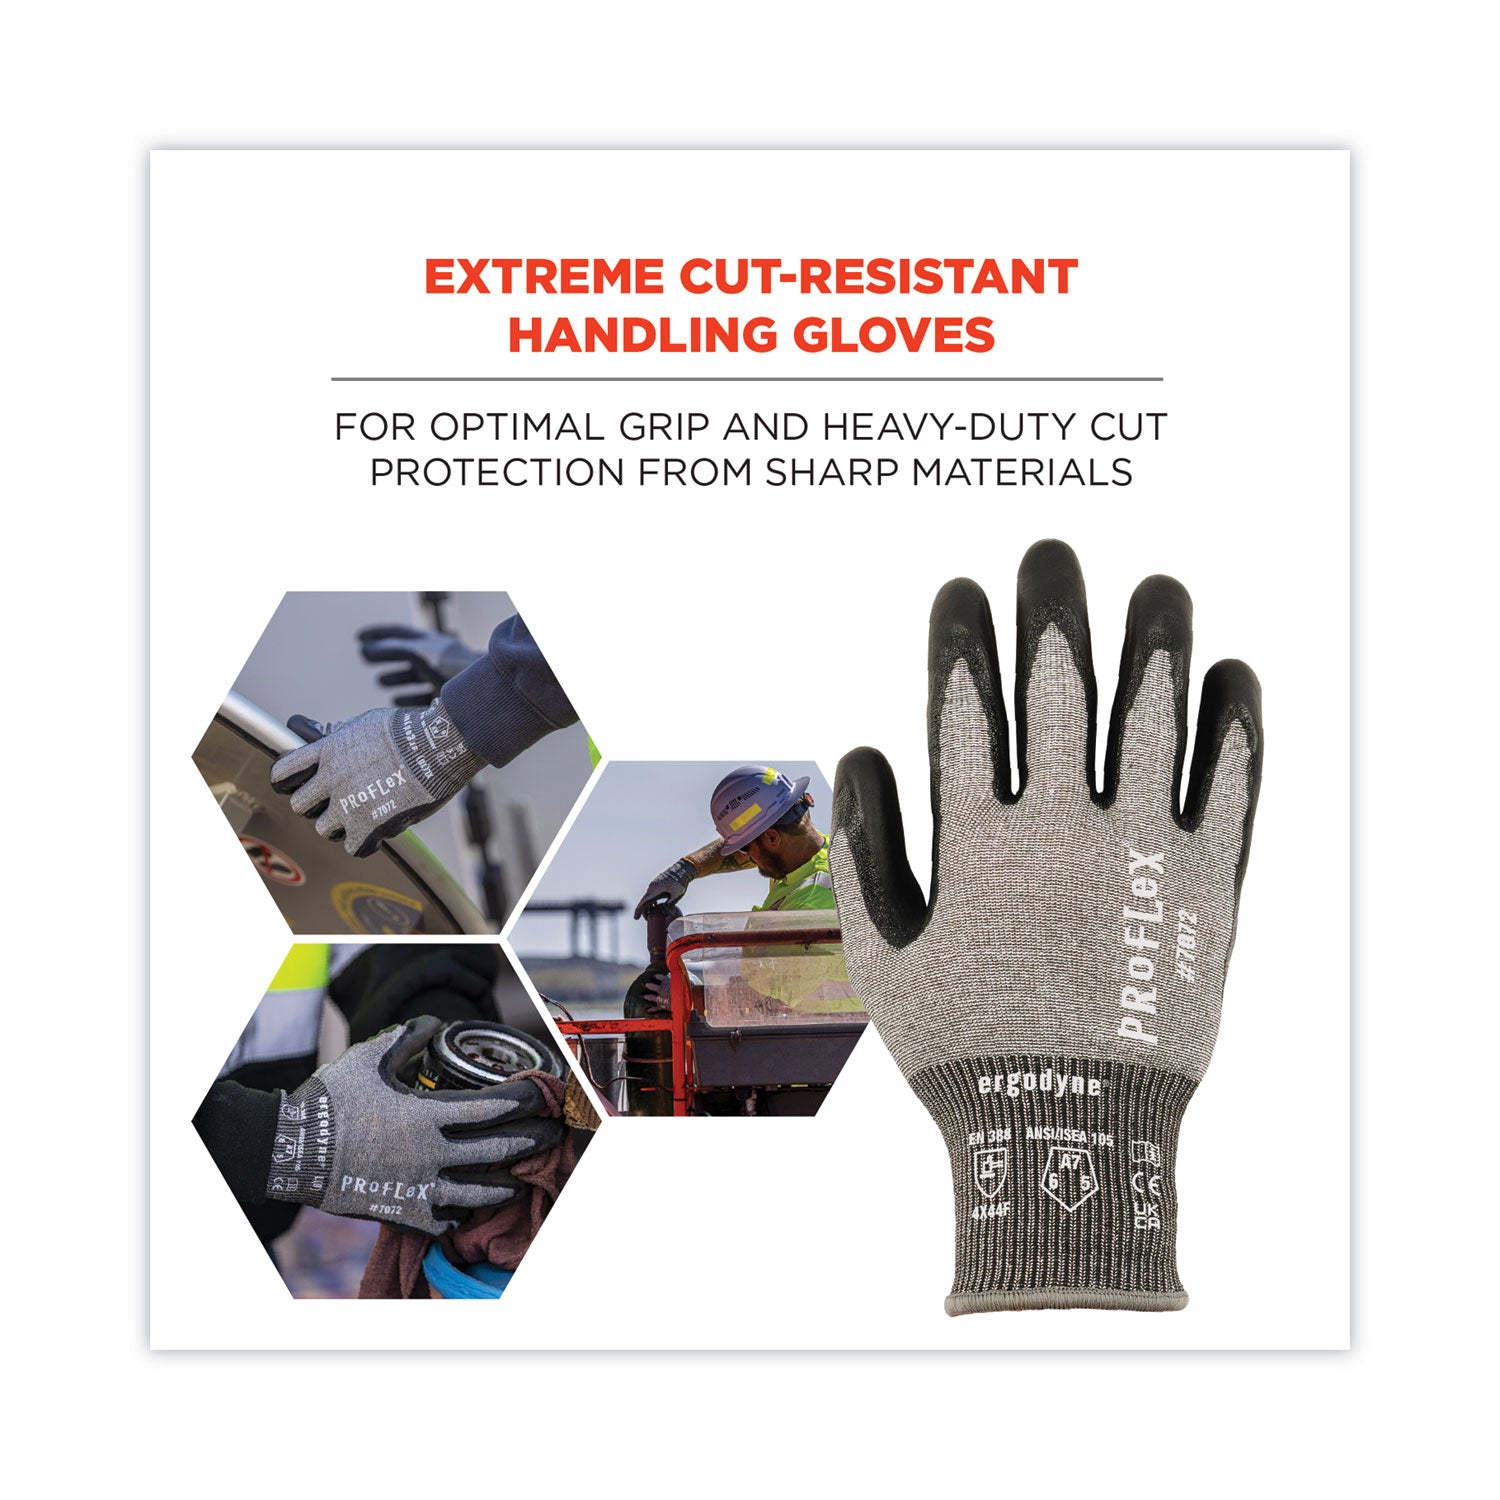 proflex-7072-ansi-a7-nitrile-coated-cr-gloves-gray-large-12-pairs-pack-ships-in-1-3-business-days_ego10304 - 7